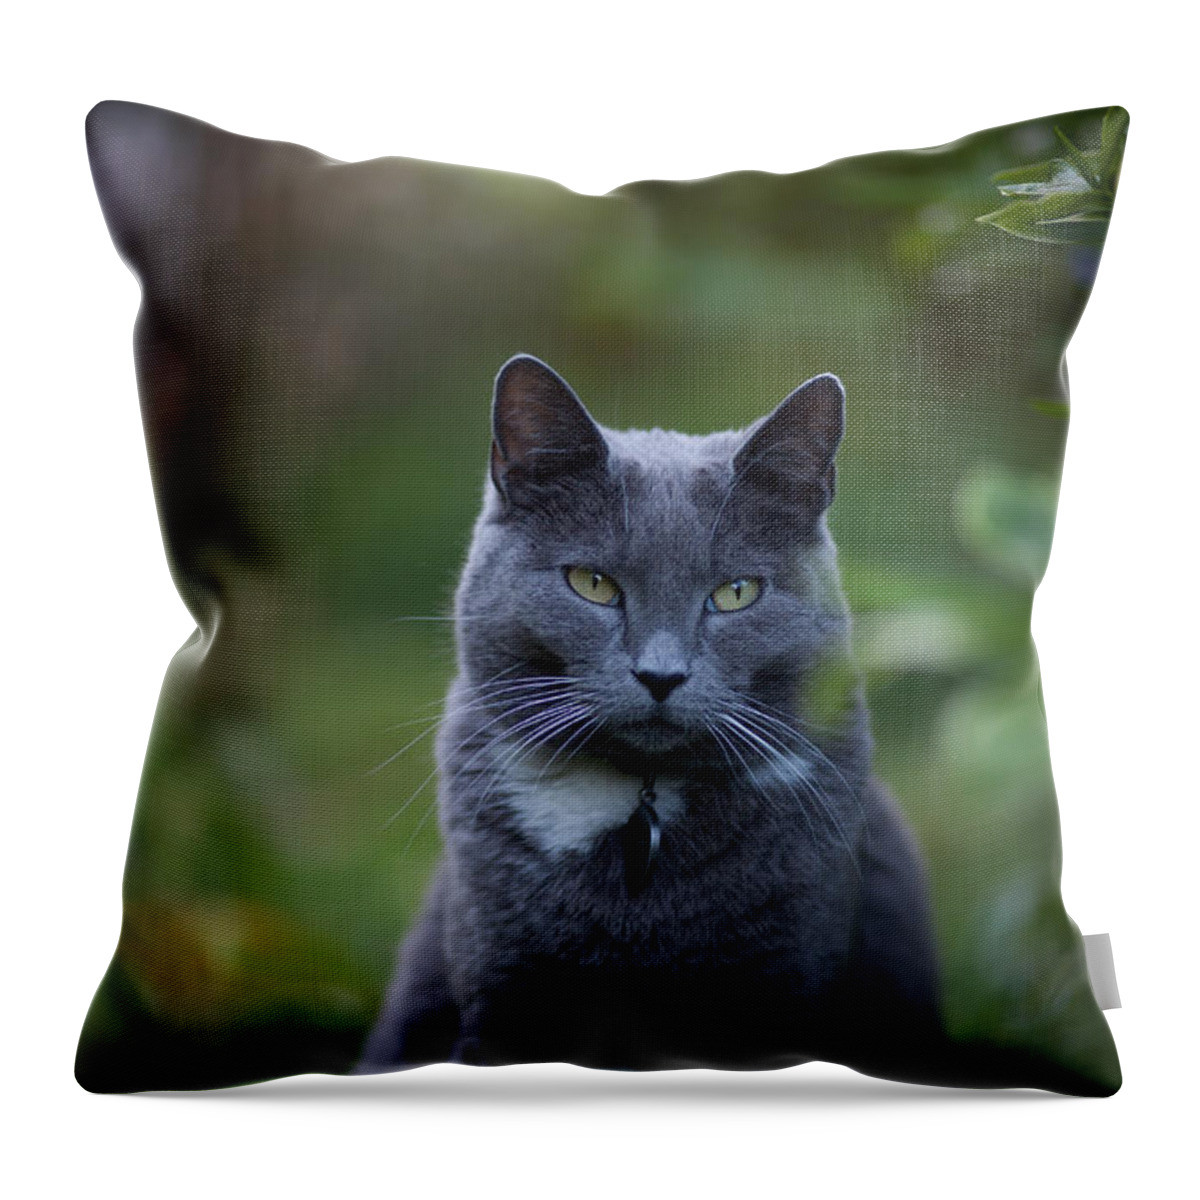 Cat Throw Pillow featuring the photograph Looking Away by Mike Reid